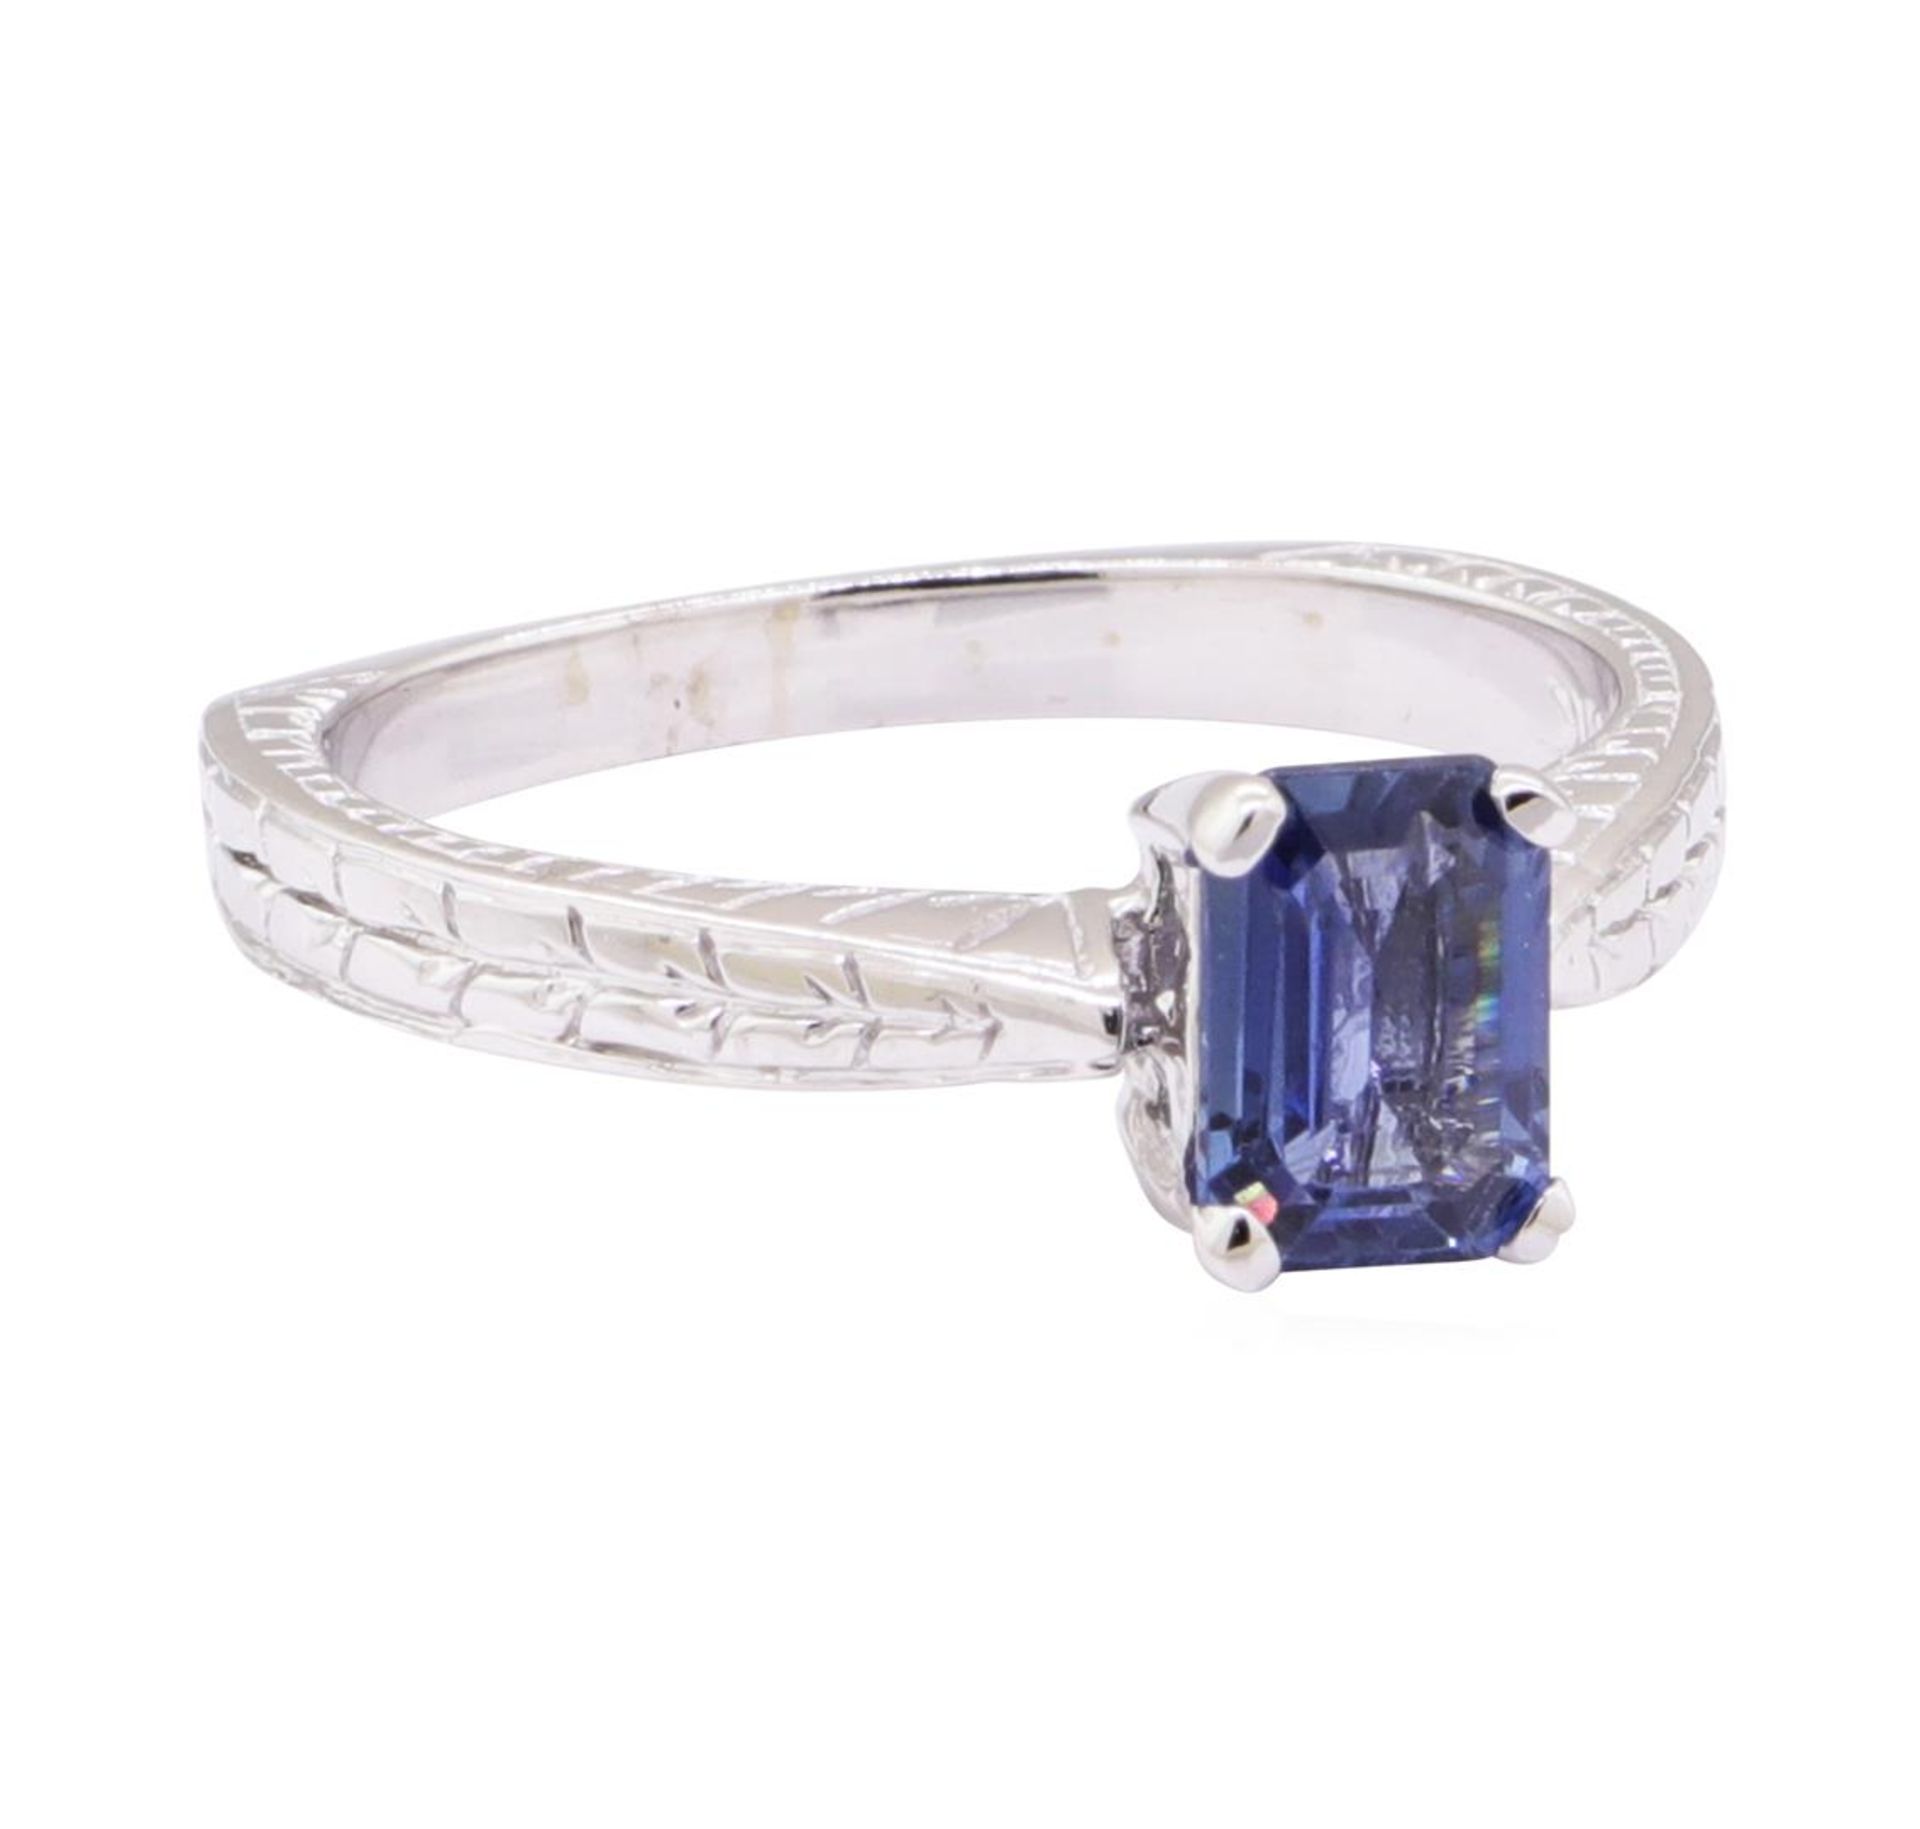 1.09ct Blue Sapphire Solitaire Ring - 14KT White Gold